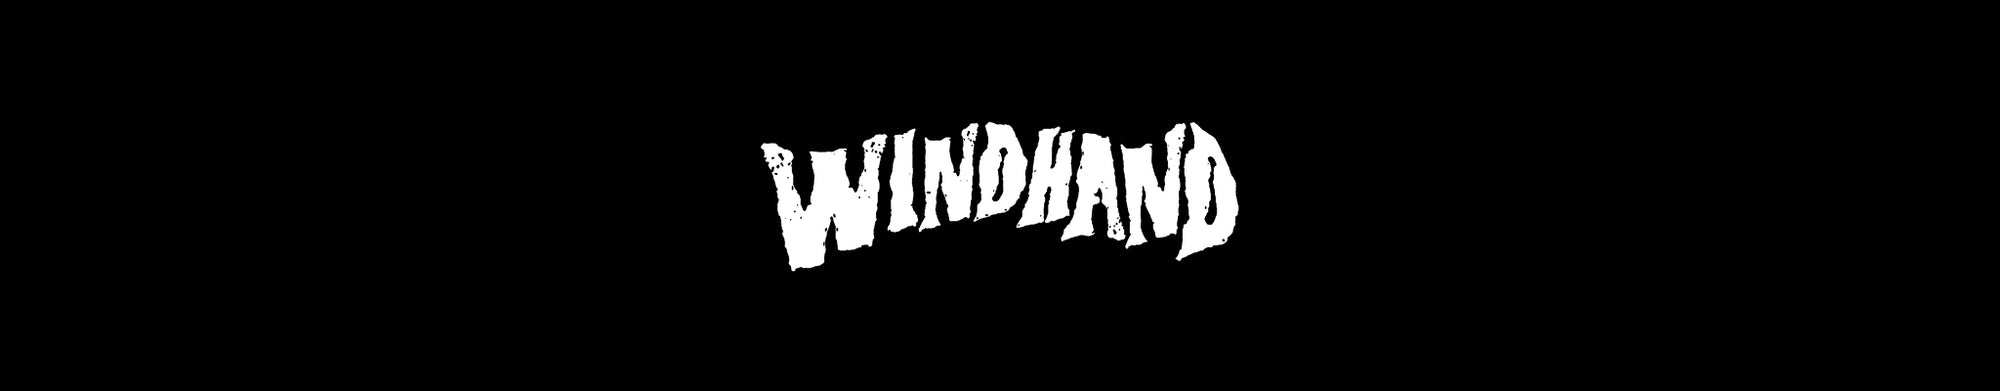 WINDHAND